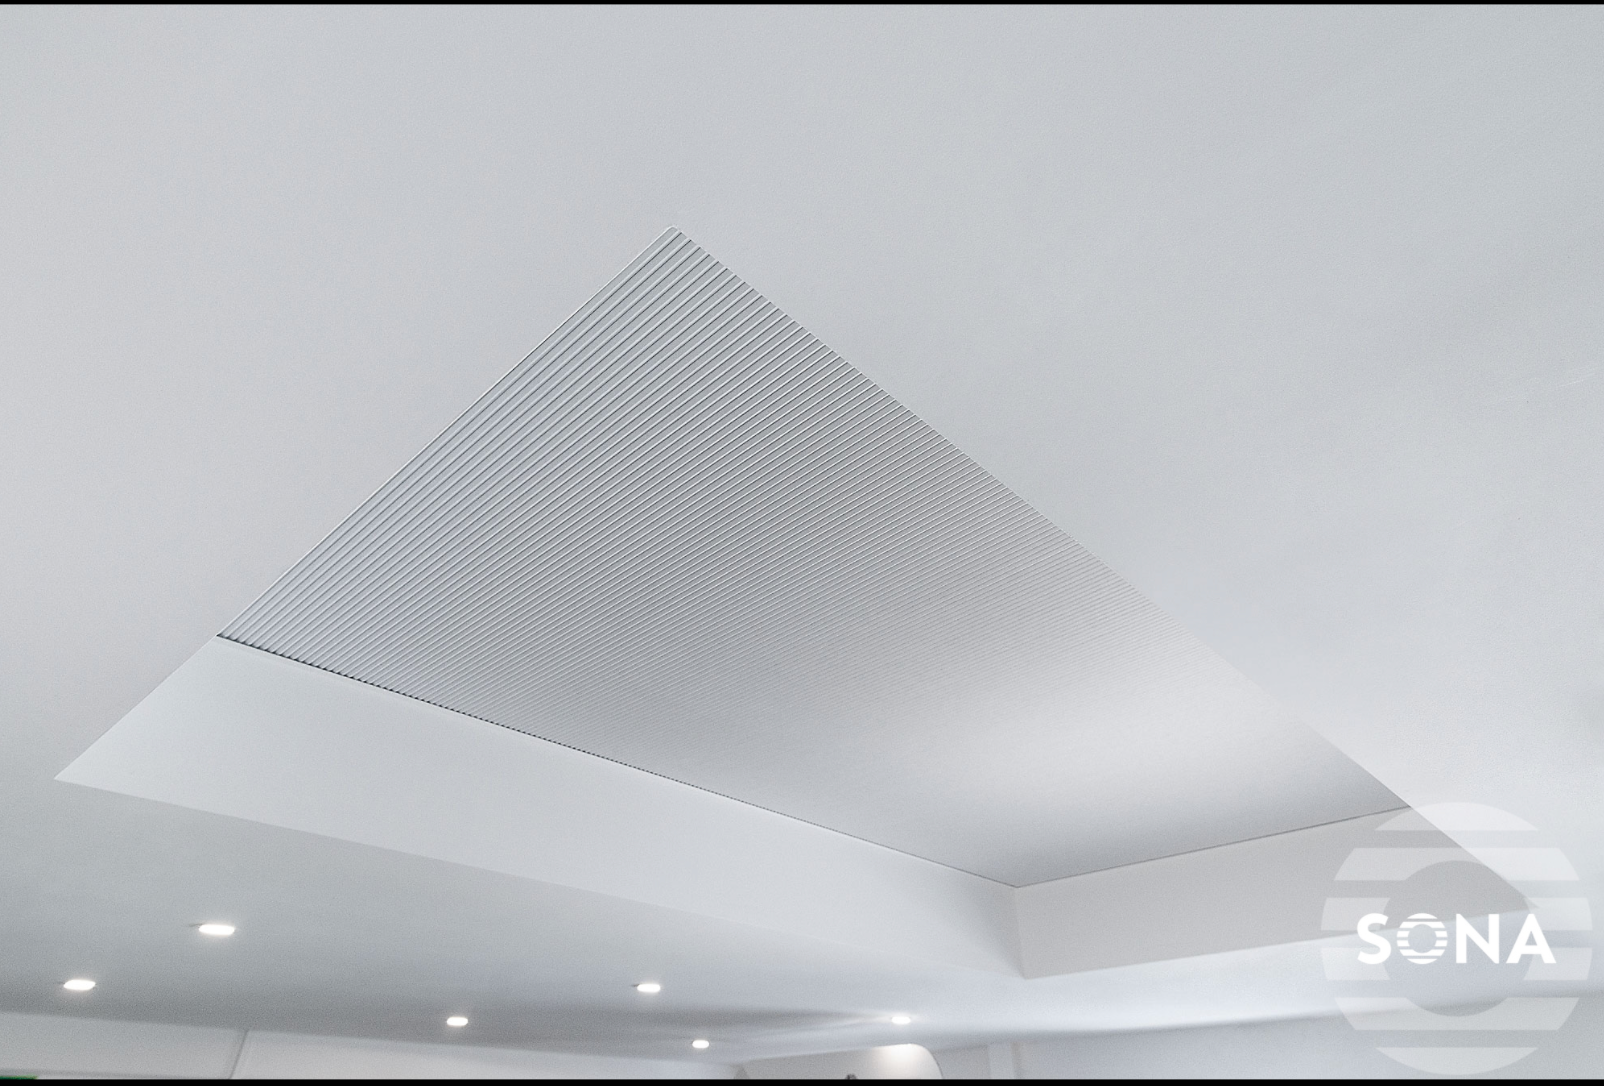 Electric Blinds for Flat & Pitched Roof Skylight 1000x1000mm